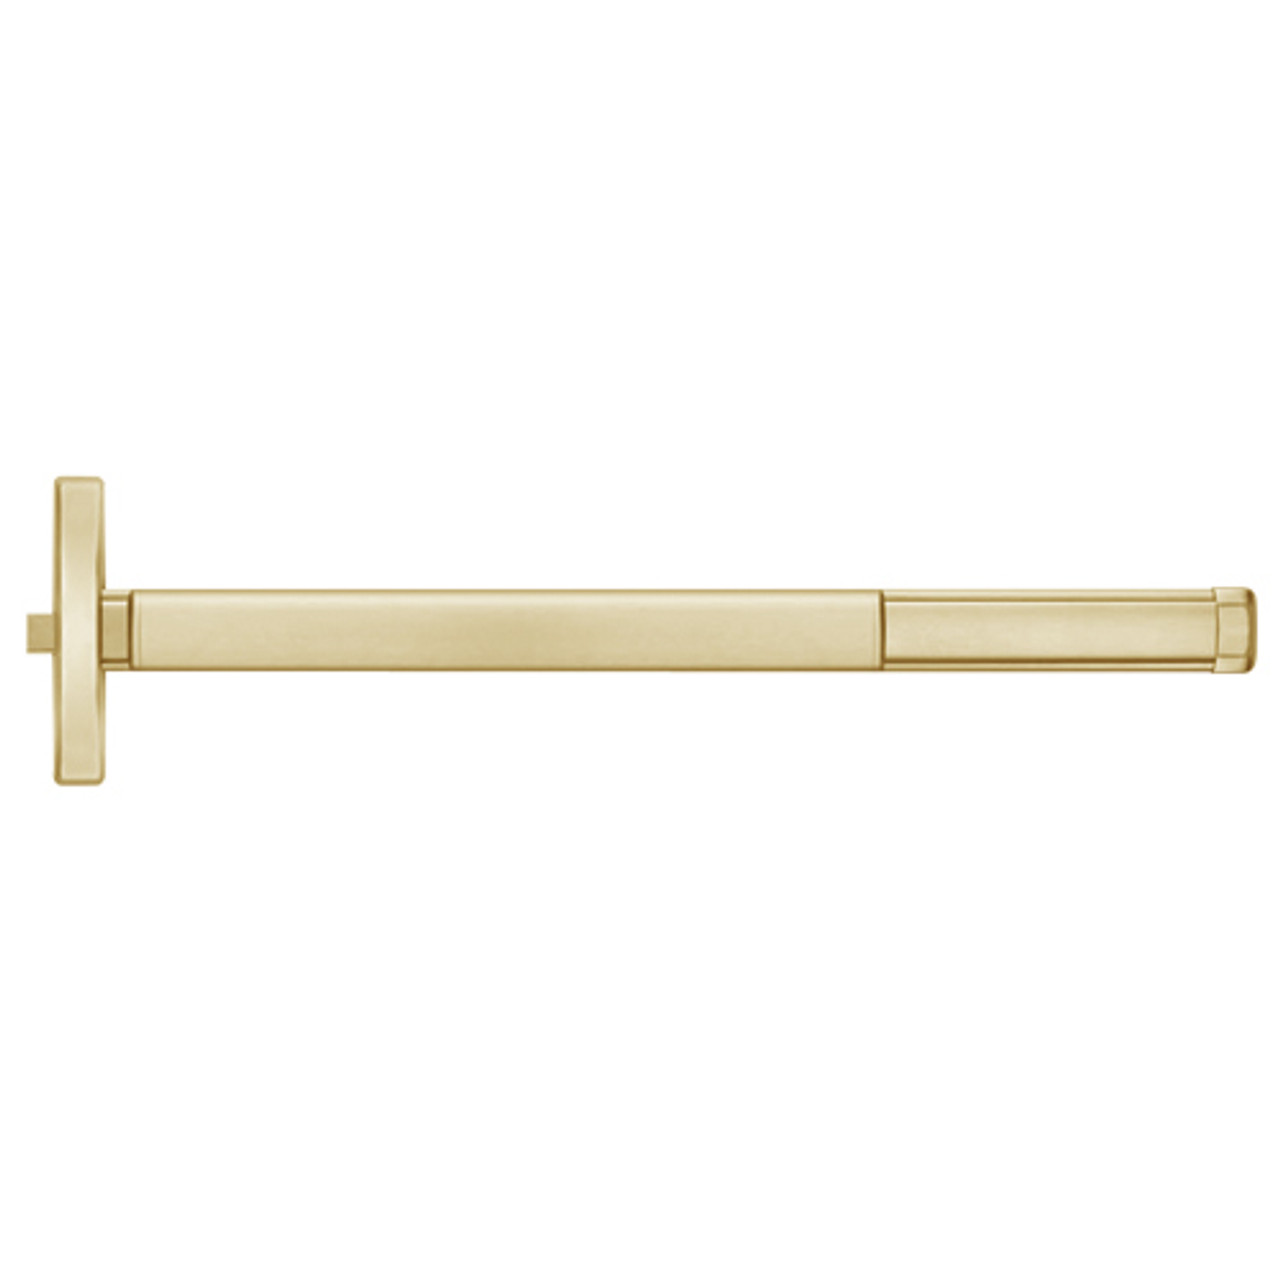 TSFL2402-606-48 PHI 2400 Series Fire Rated Apex Rim Exit Device with Touchbar Monitoring Switch Prepped for Dummy Trim in Satin Brass Finish